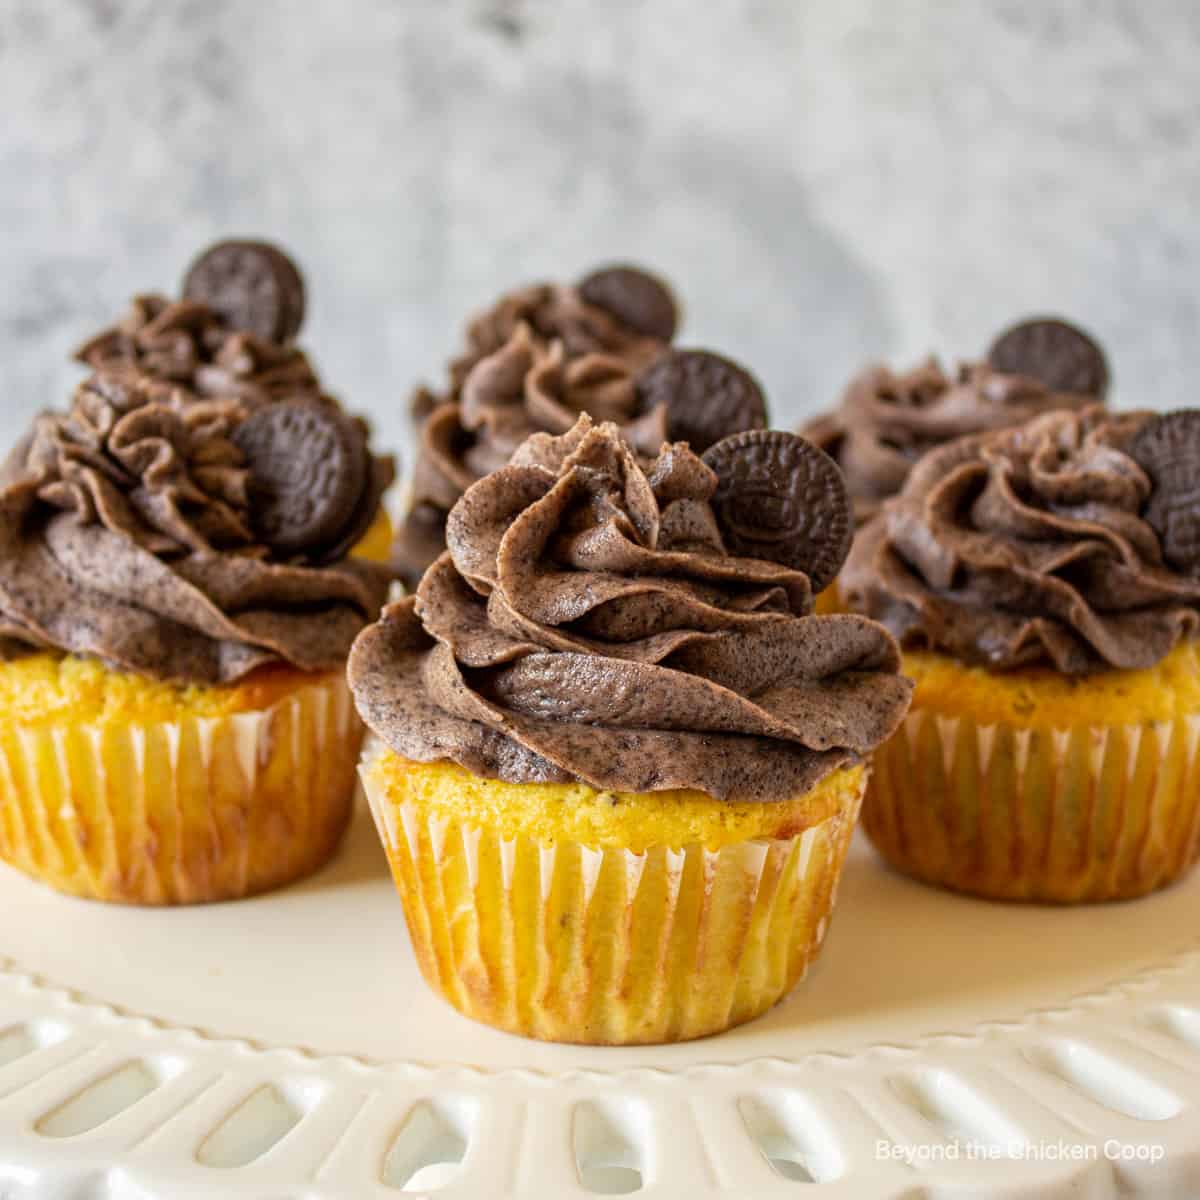 Oreo Cupcakes topped with a chocolate frosting.